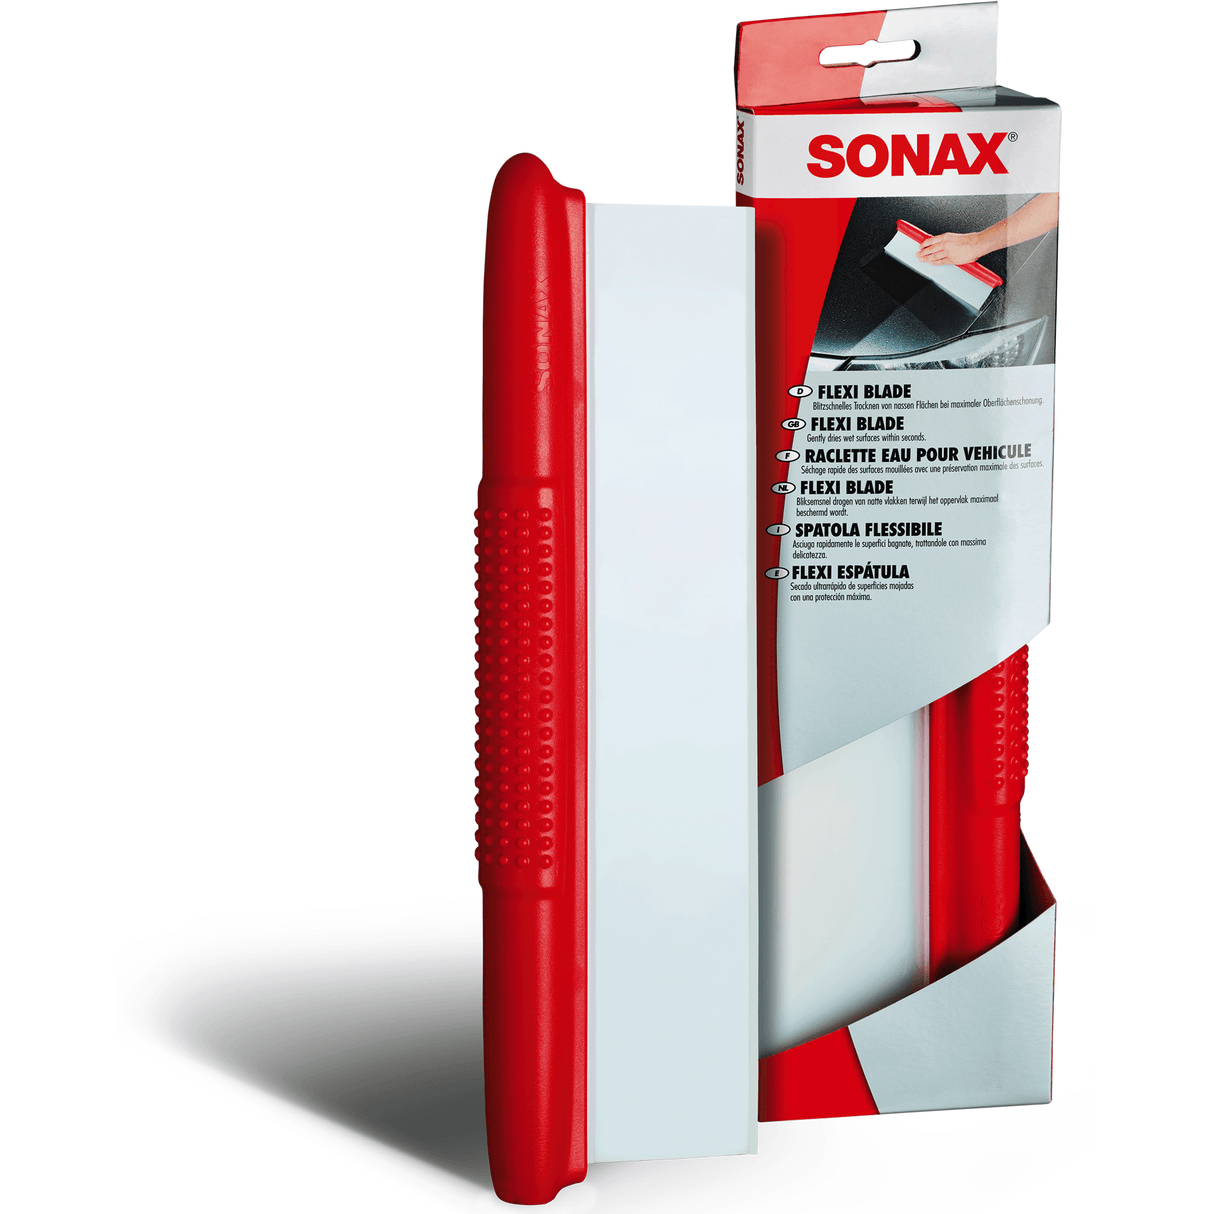 SONAX Flexiblade - Xpert Cleaning